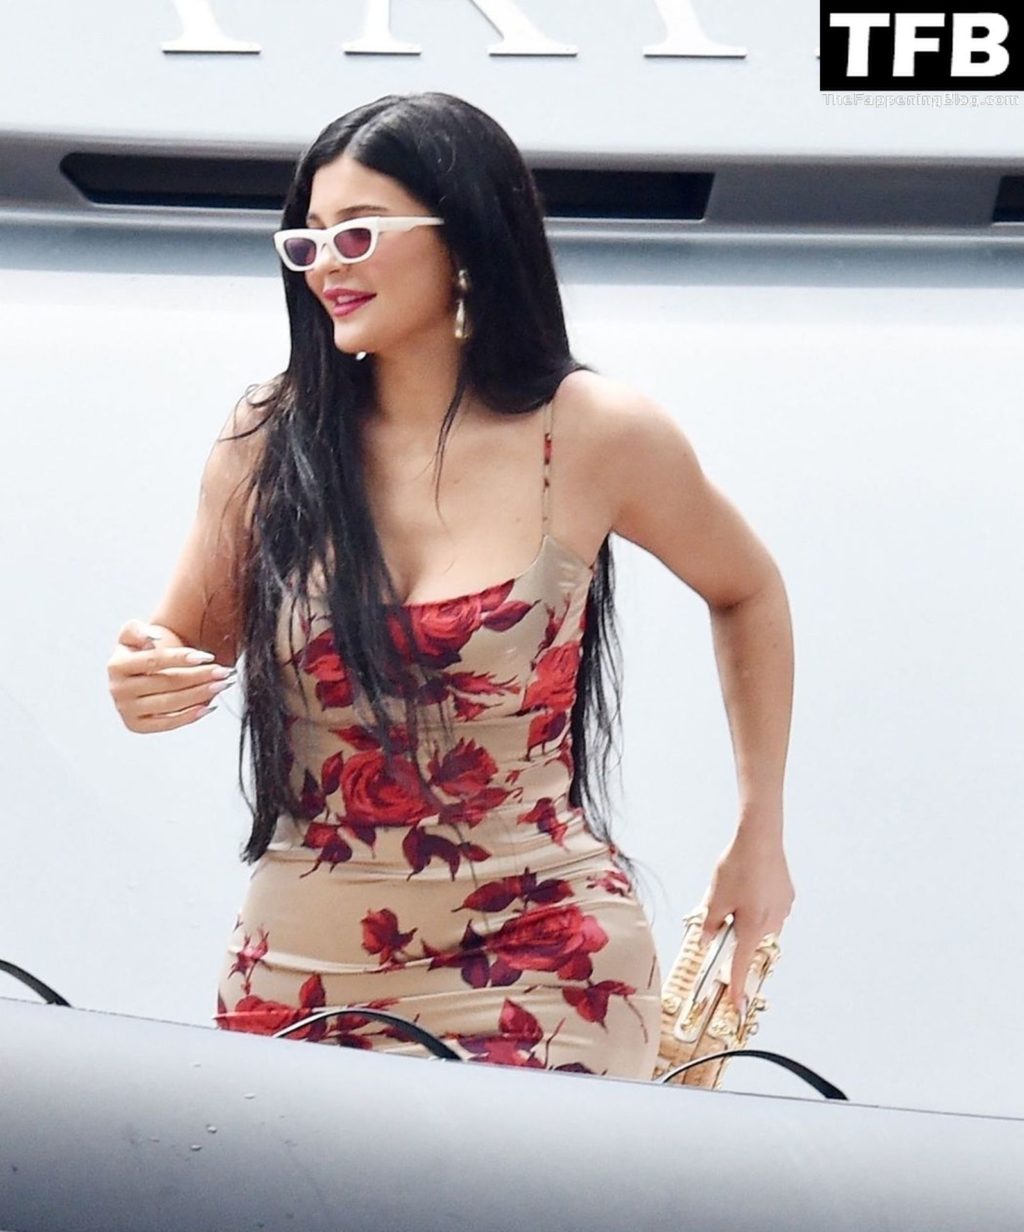 Kylie Jenner Sexy The Fappening Blog 4 1024x1232 - Kylie Jenner Flaunts Her Curves in Portofino (32 Photos)